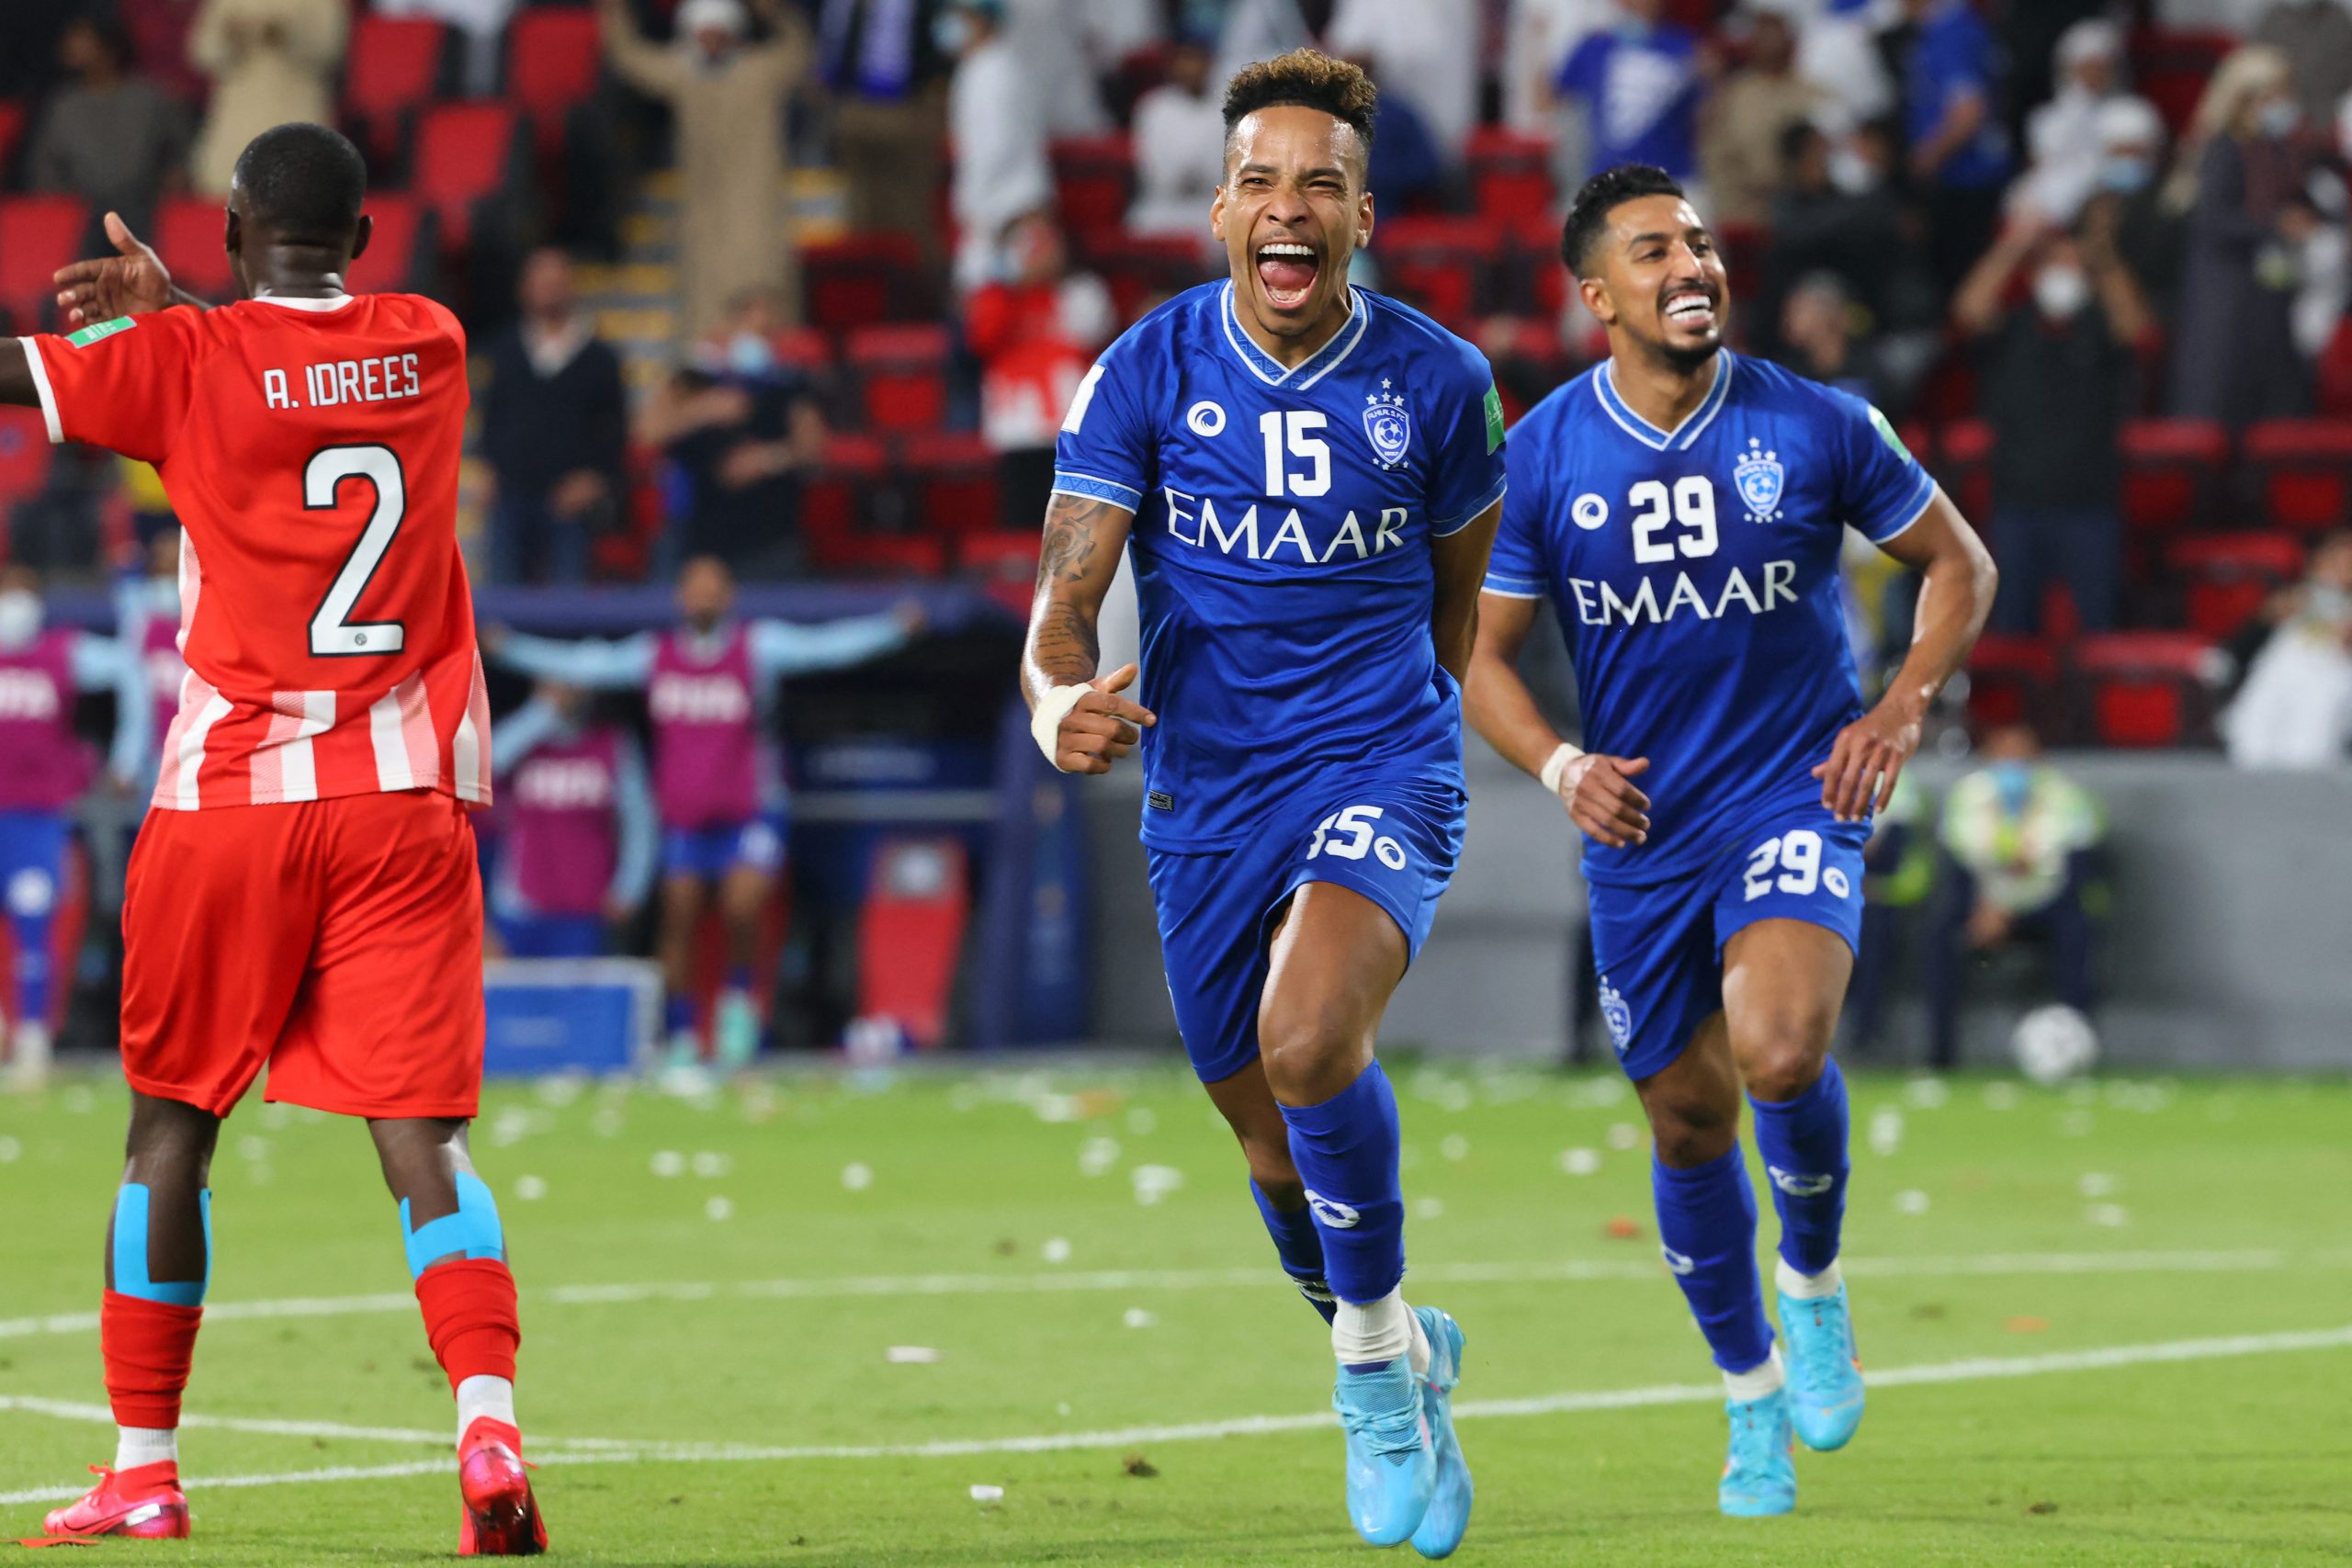 AFC disqualify Al Hilal from the Asian Champions league - AS USA